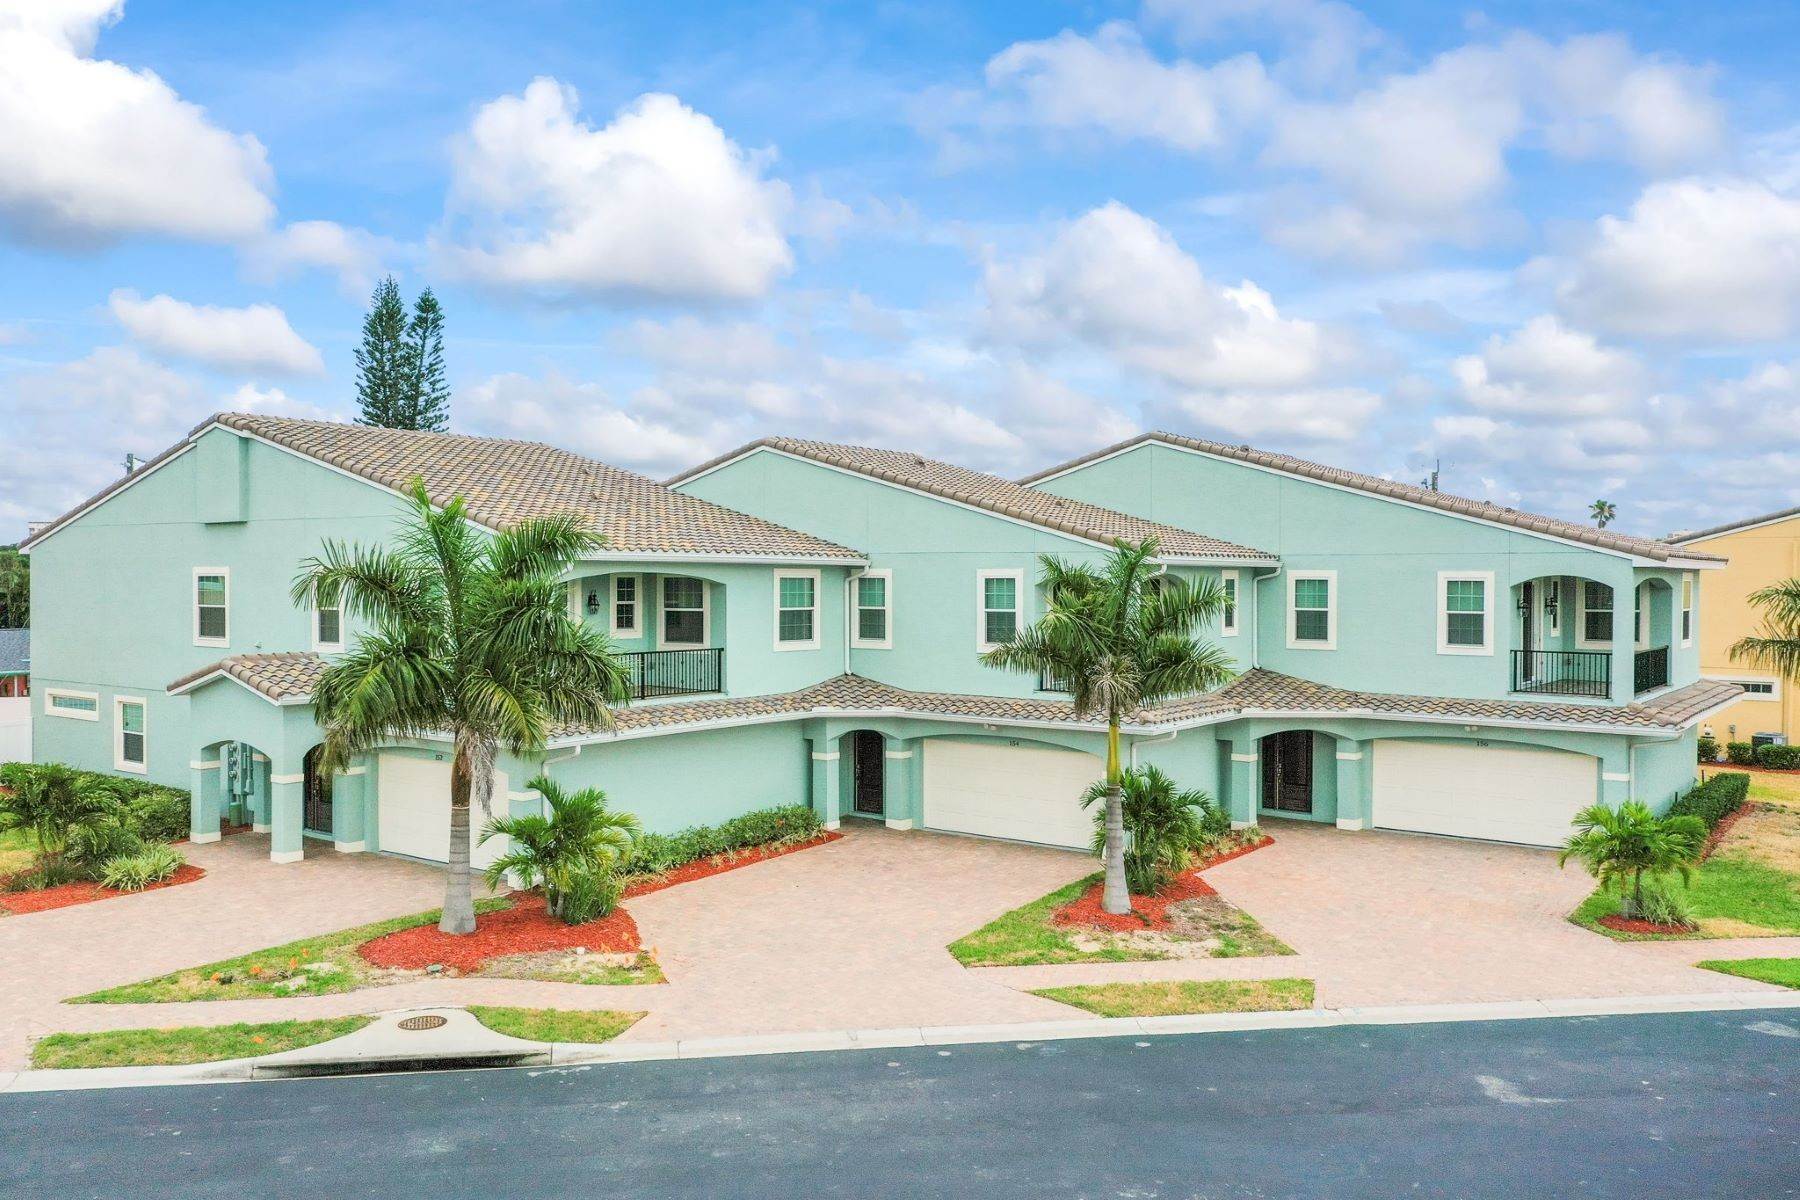 Multi-Family Homes for Sale at 154 Mediterranean Way, Indian Harbour Beach, FL 154 Mediterranean Way Indian Harbour Beach, Florida 32937 United States